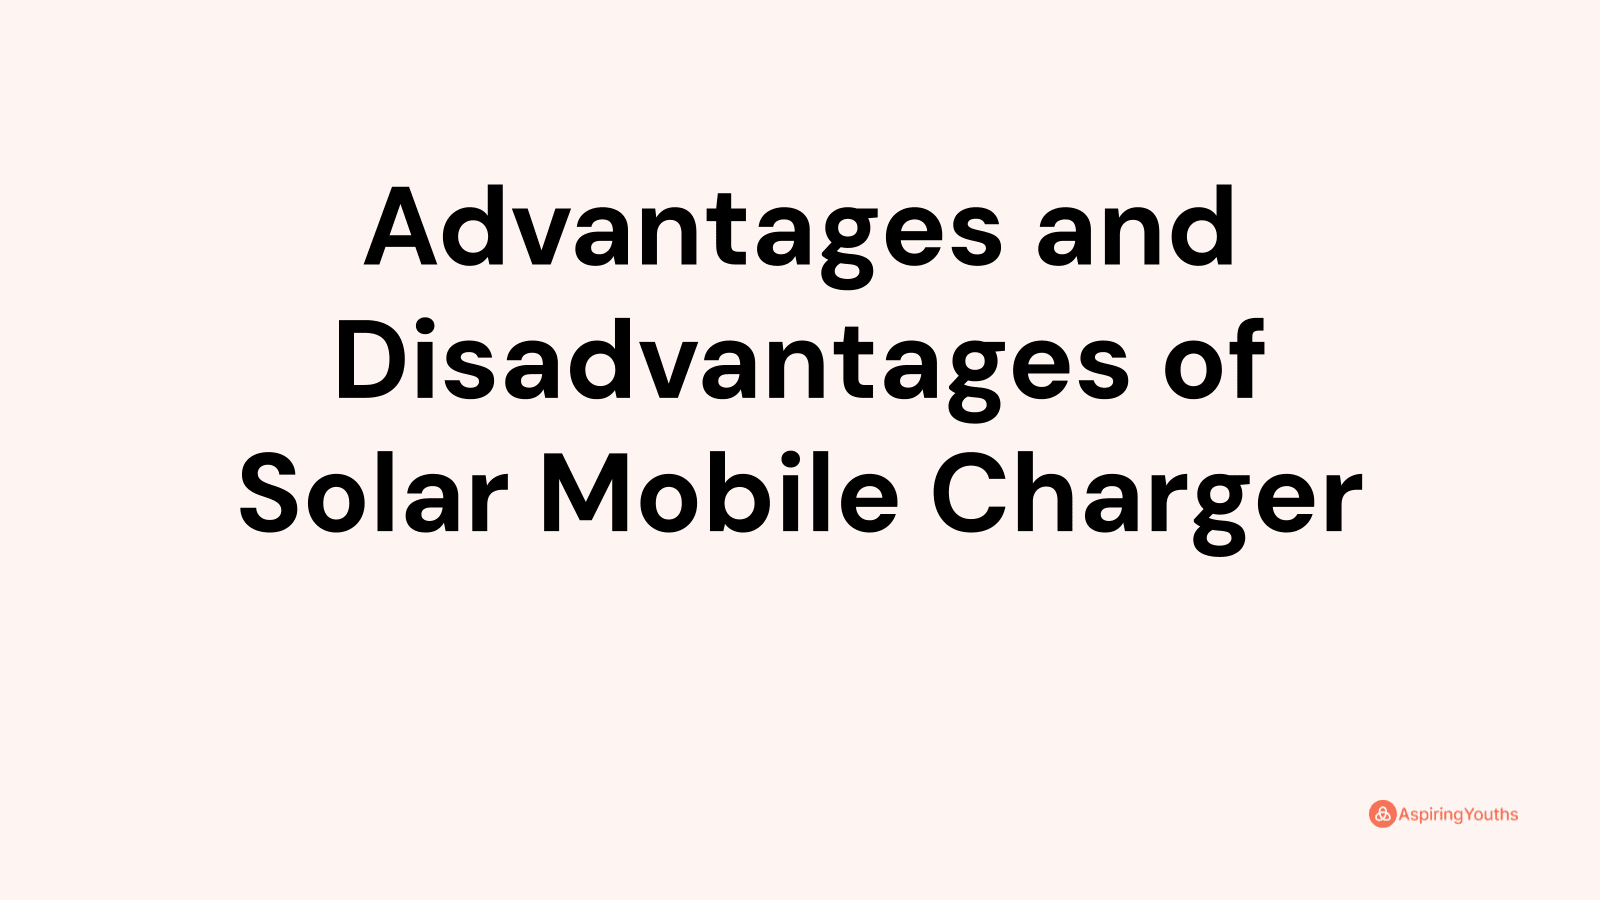 Advantages and disadvantages of Solar Mobile Charger